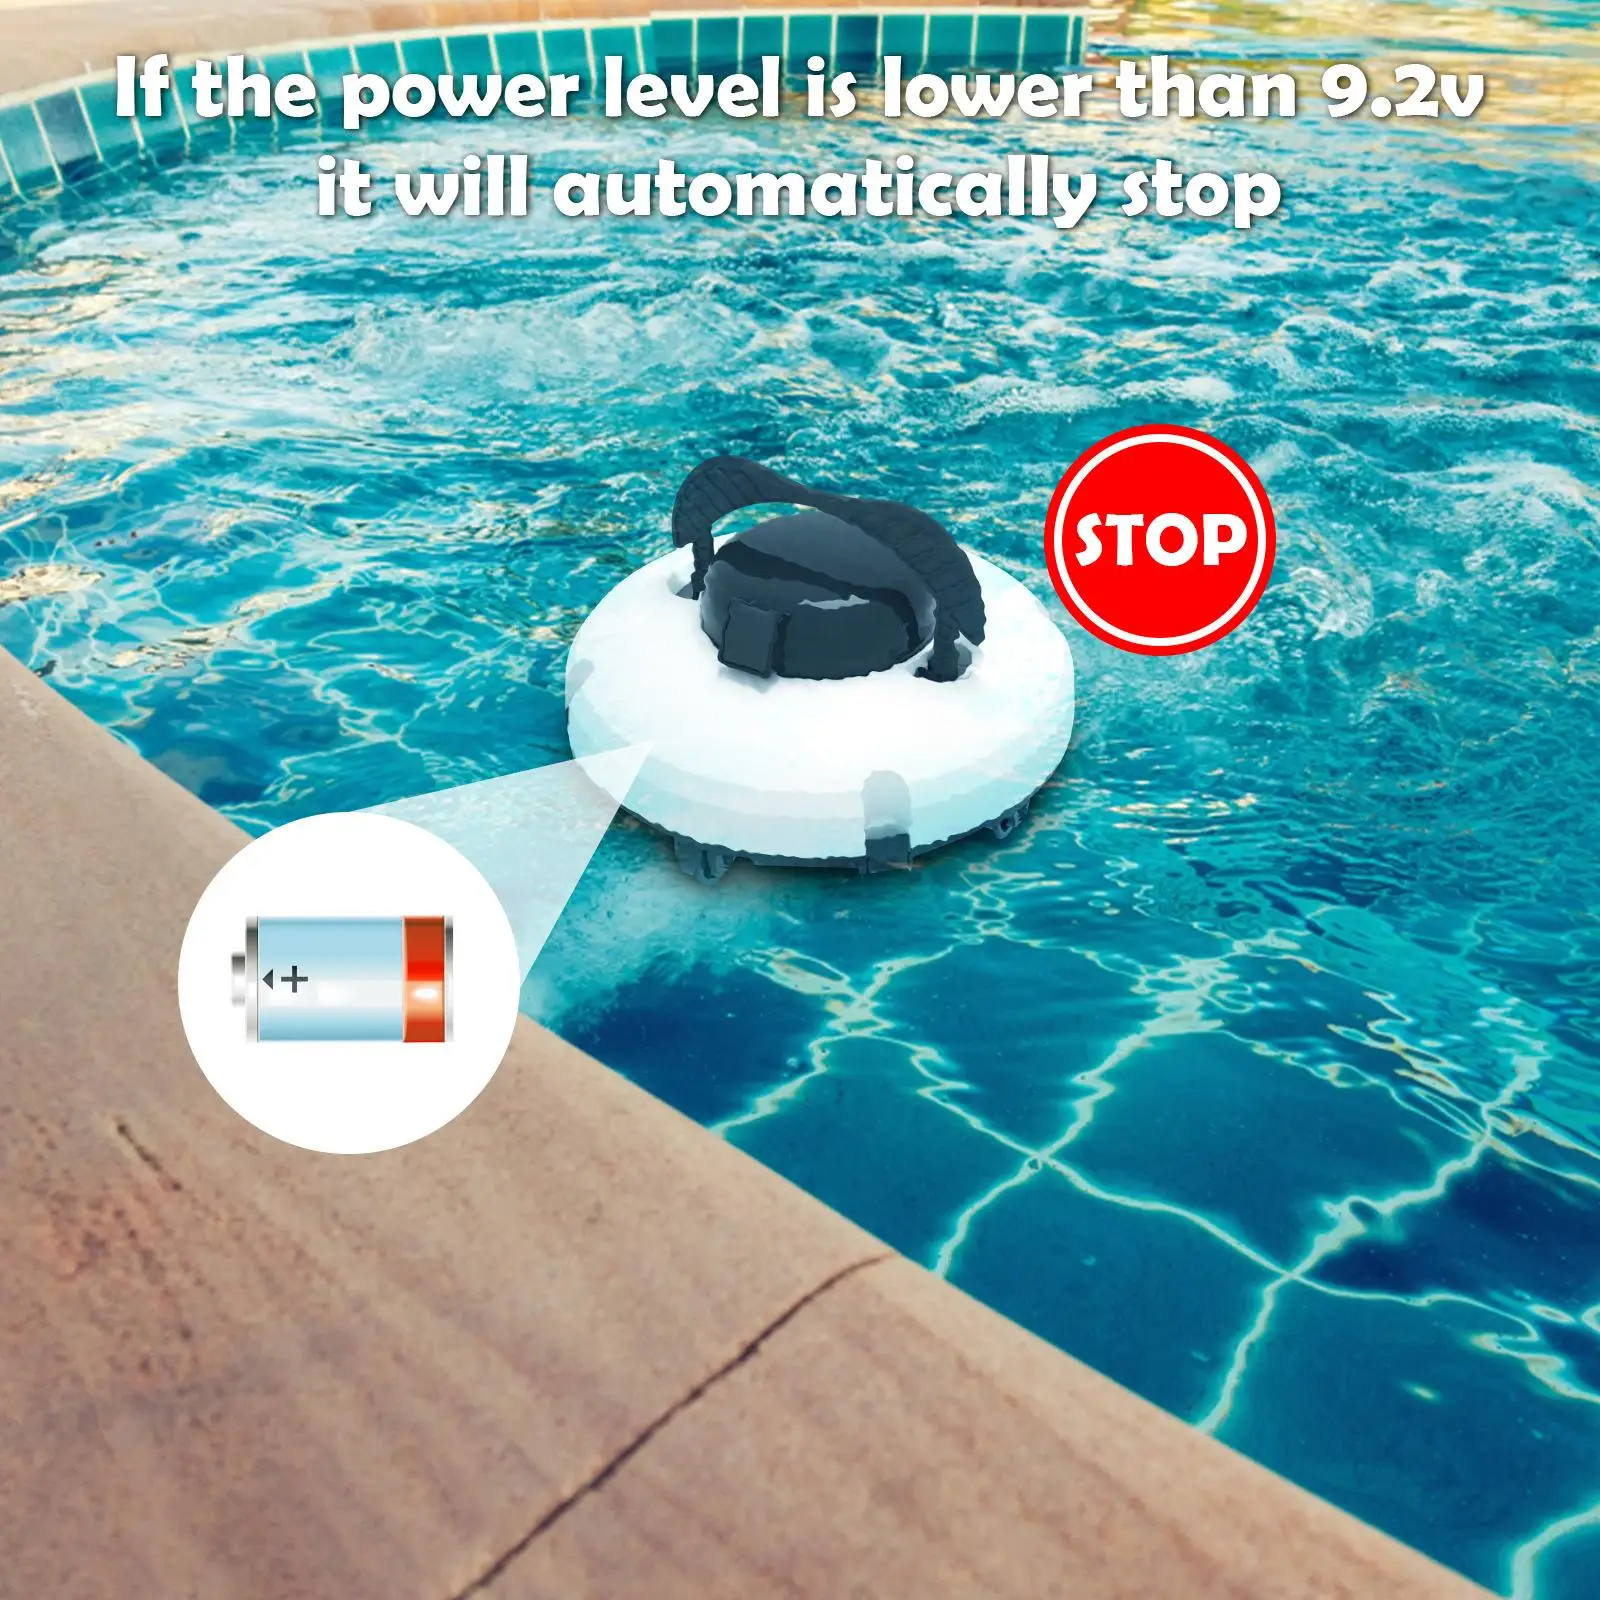 Cordless Robotic Pool Cleaner Intelligent Automatic for Efficient Cleaning IPX8 Waterproof Dual-Motor Suction Self-Parking